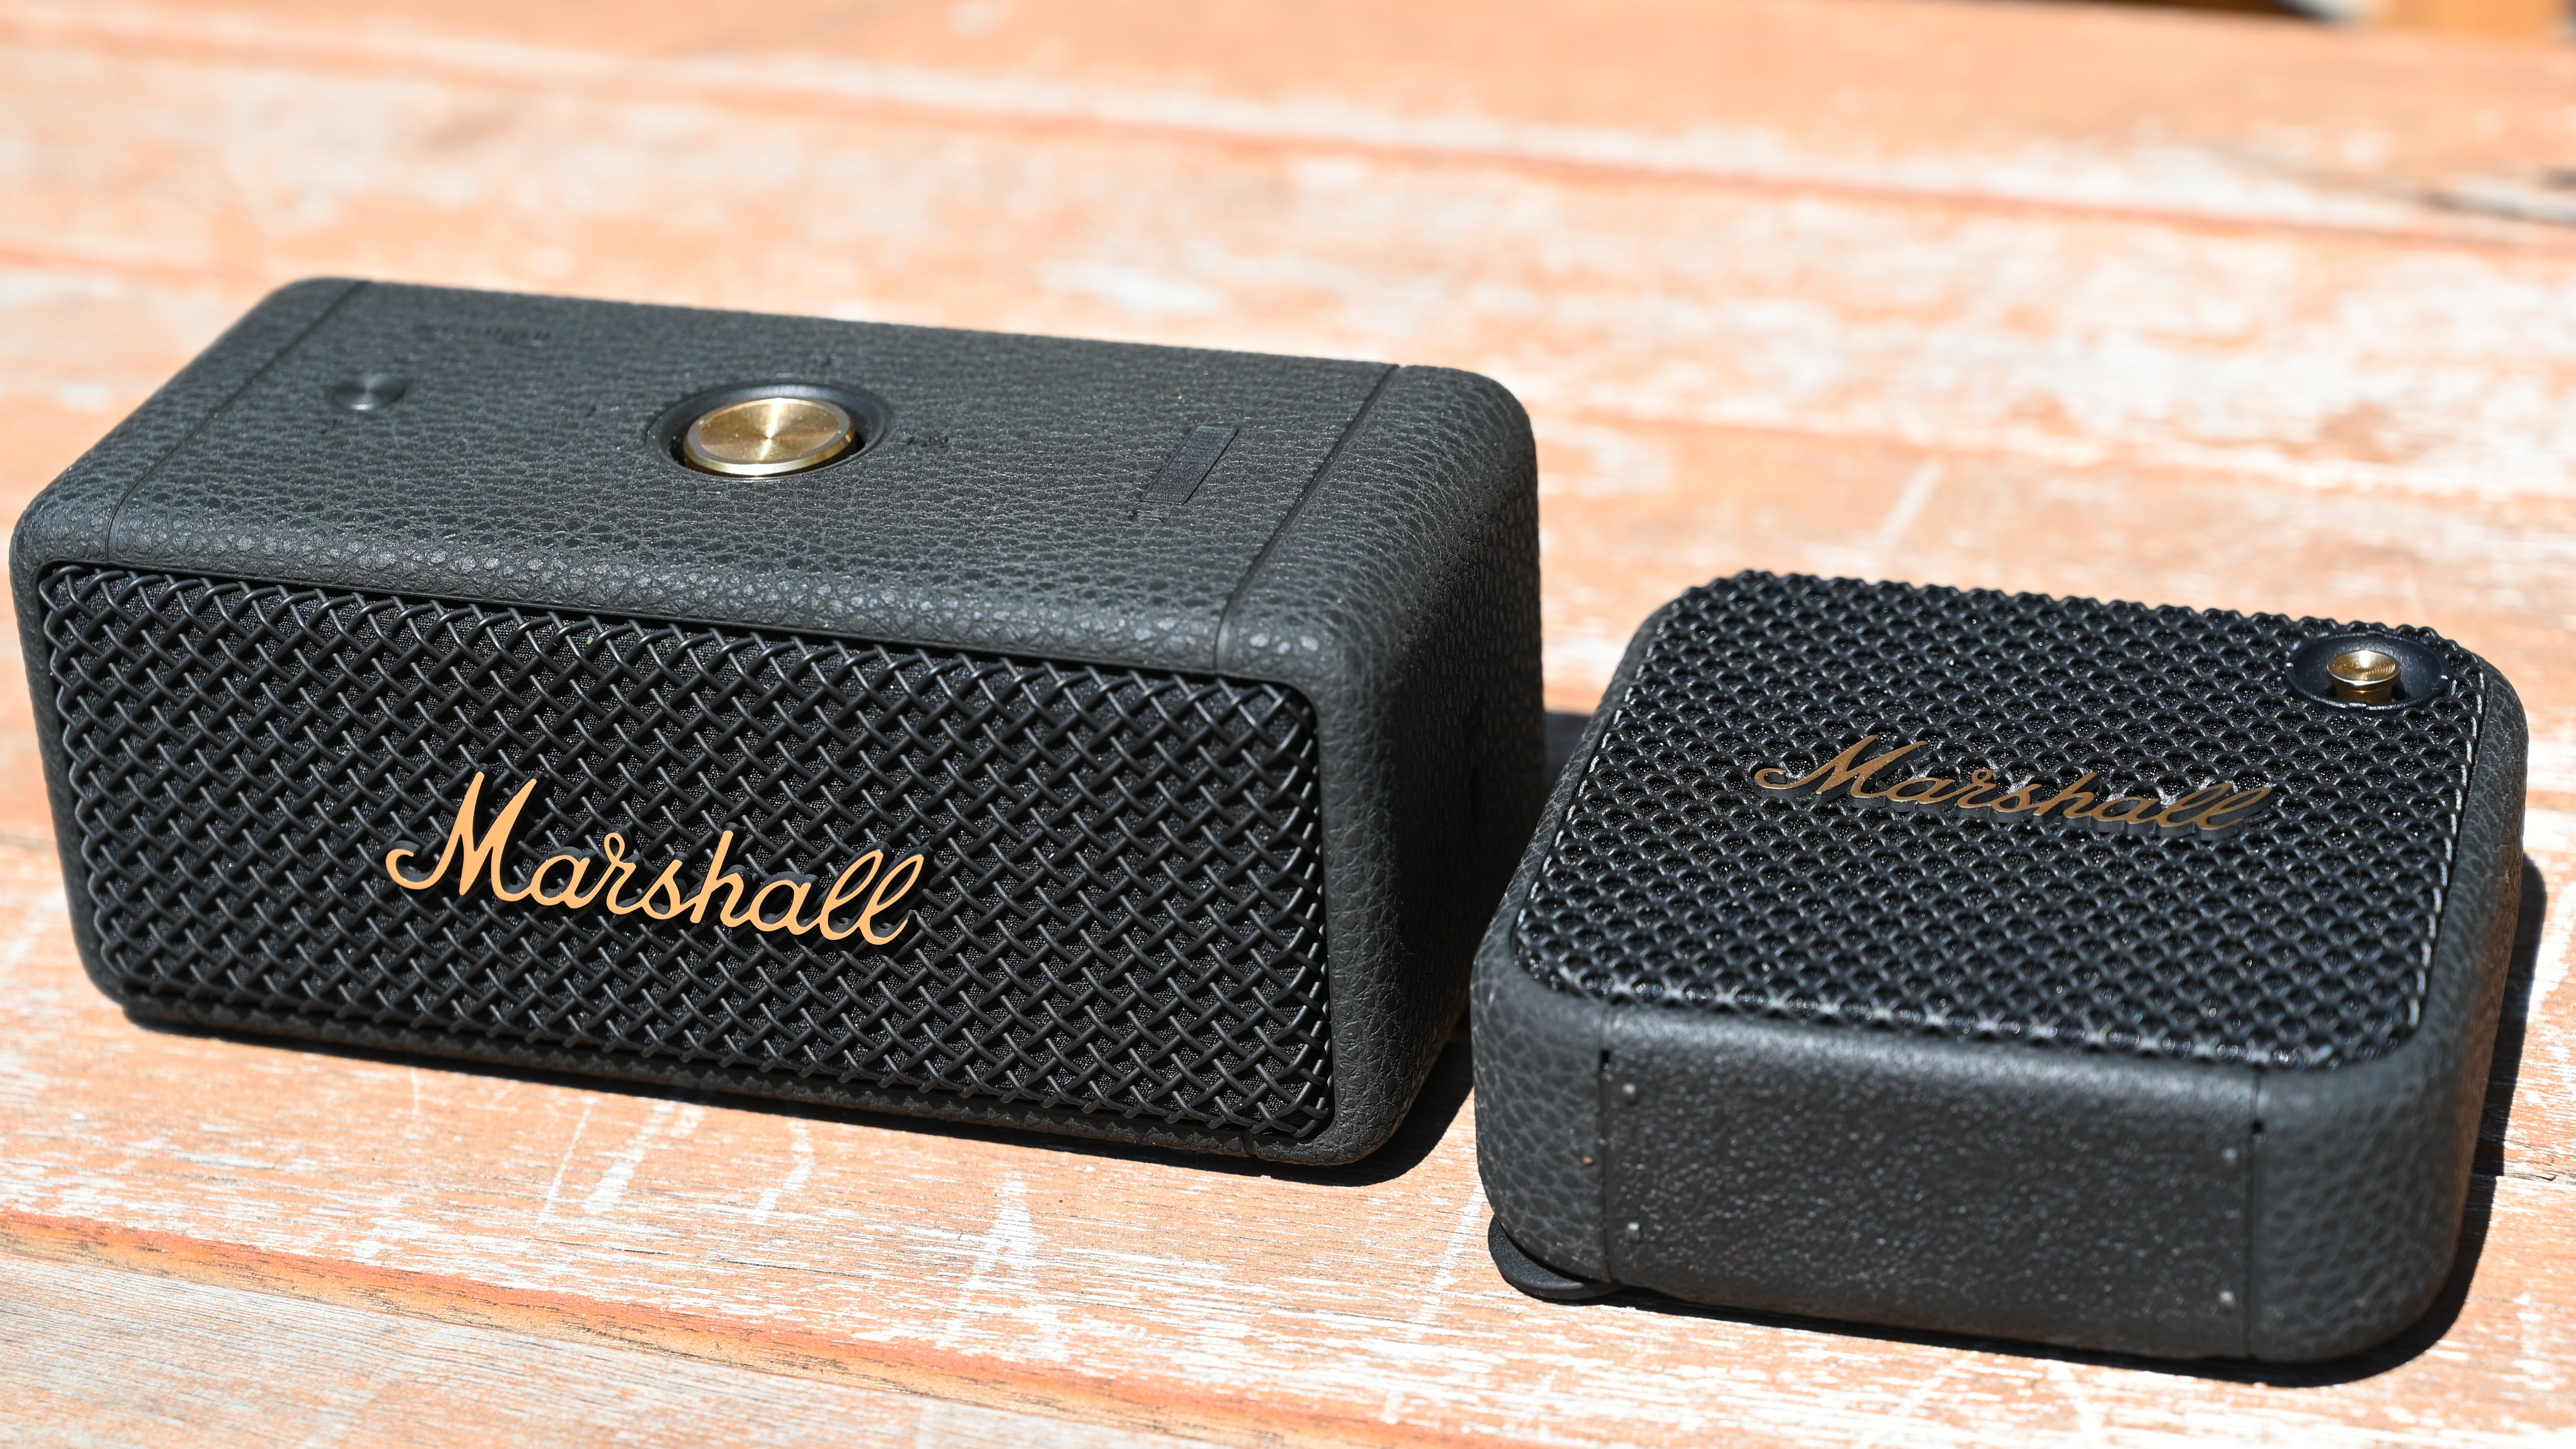 Marshall Willen and Emberton II review: Retro looks - 9to5Toys